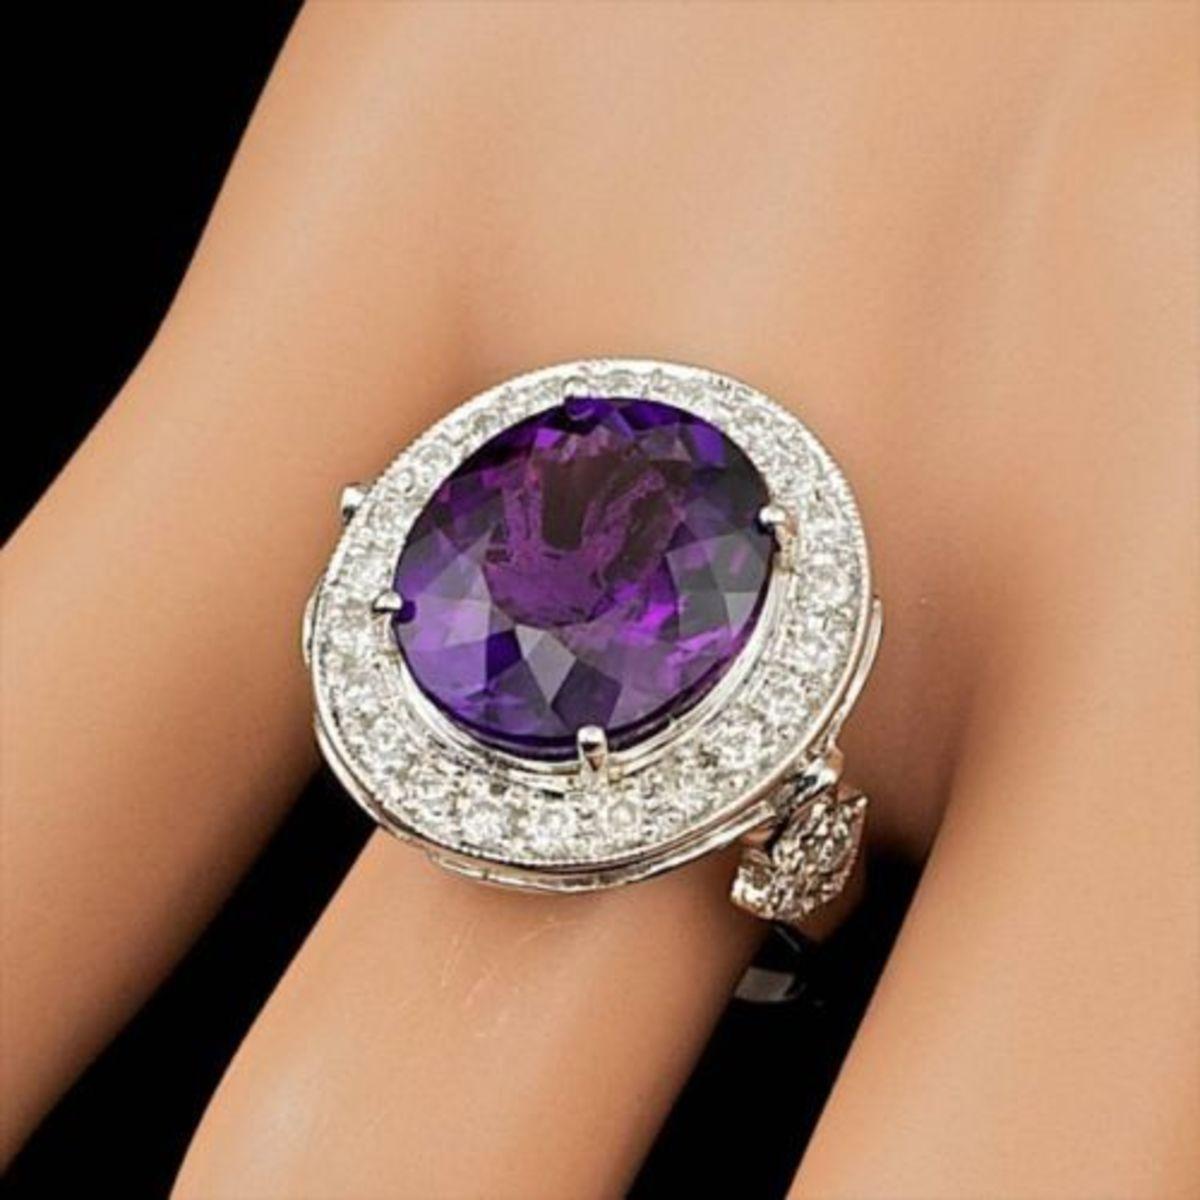 14K White Gold 7.19ct Amethyst and 1.86ct Diamond Ring